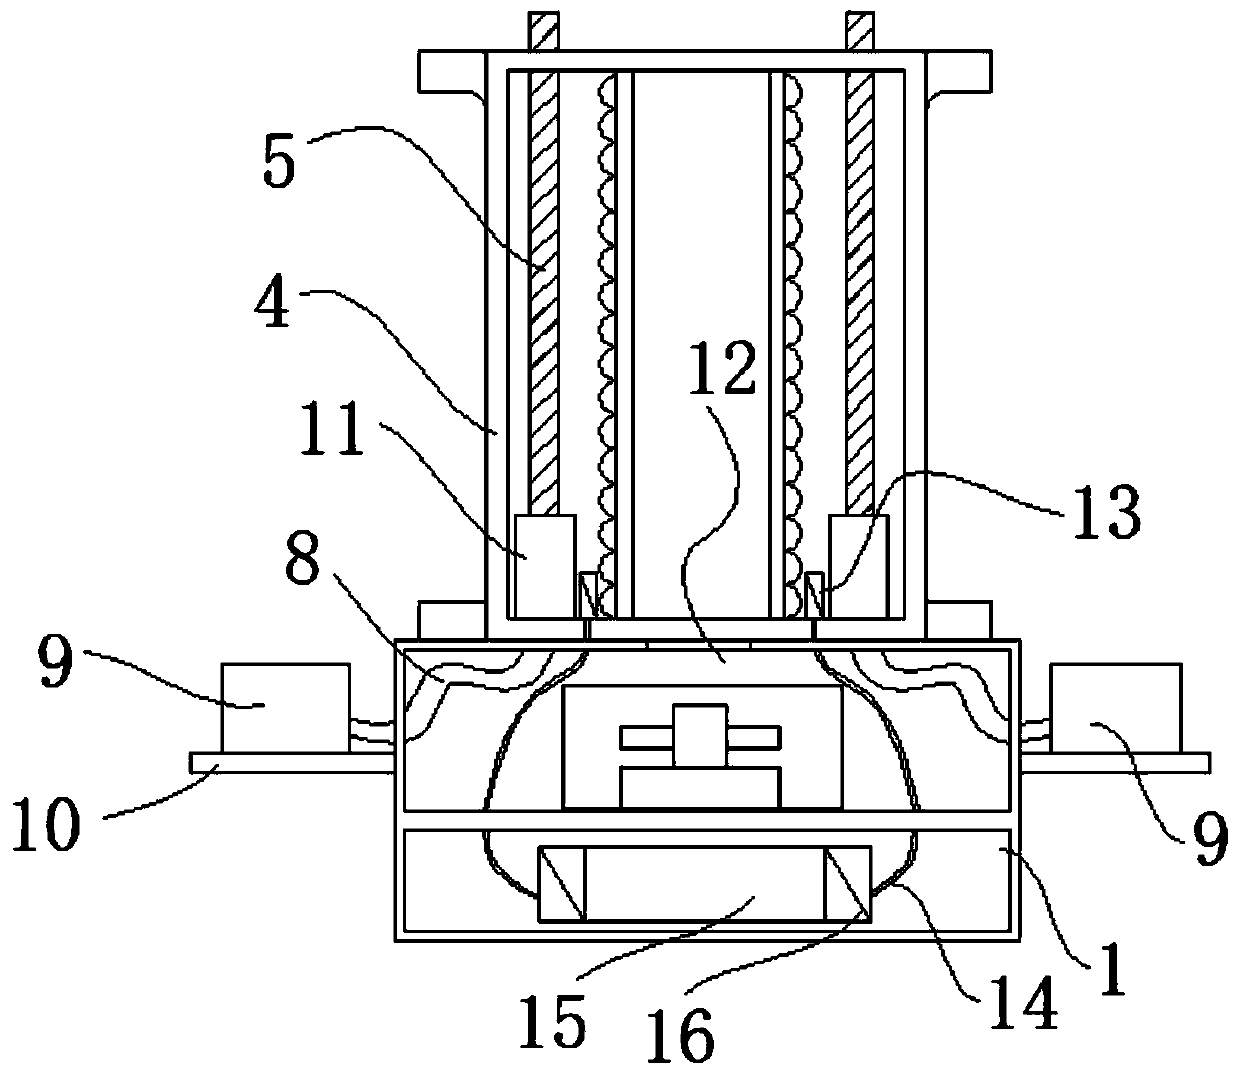 On-line cooling device for high-voltage parallel compensation reactor winding